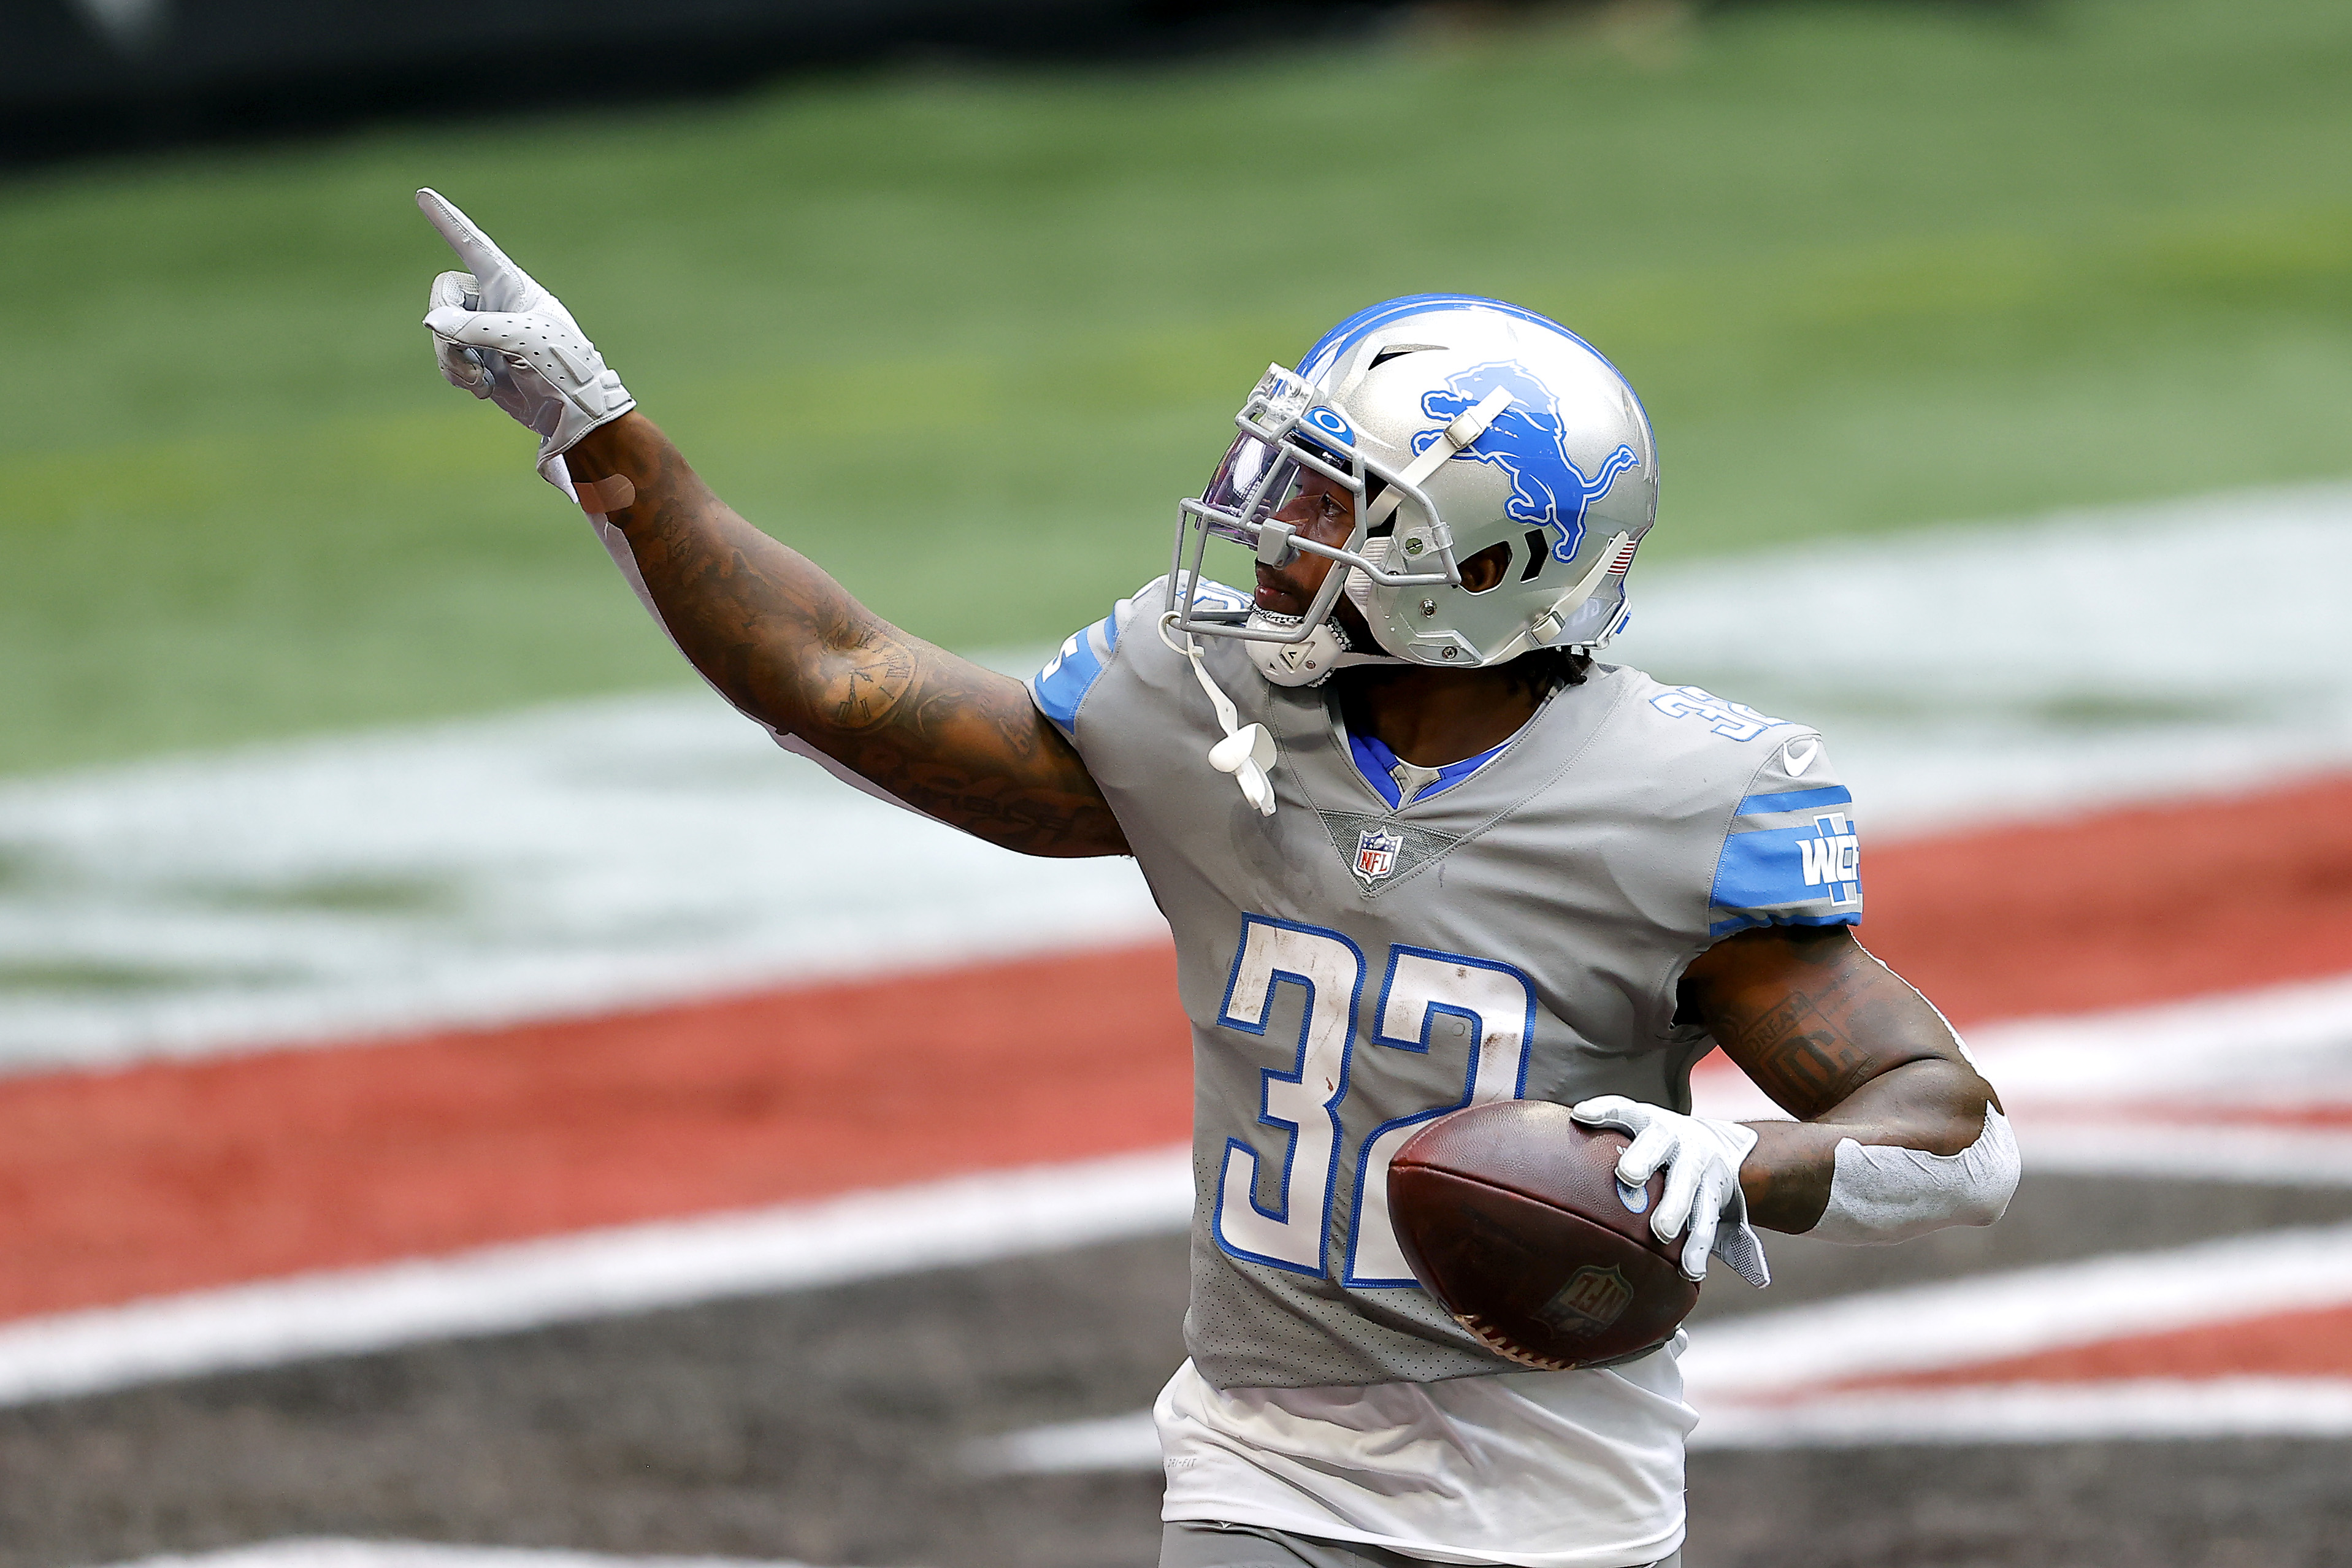 D’Andre Swift #32 of the Detroit Lions celebrates his rushing touchdown against the Atlanta Falcons during the first half at Mercedes-Benz Stadium on October 25, 2020 in Atlanta, Georgia.